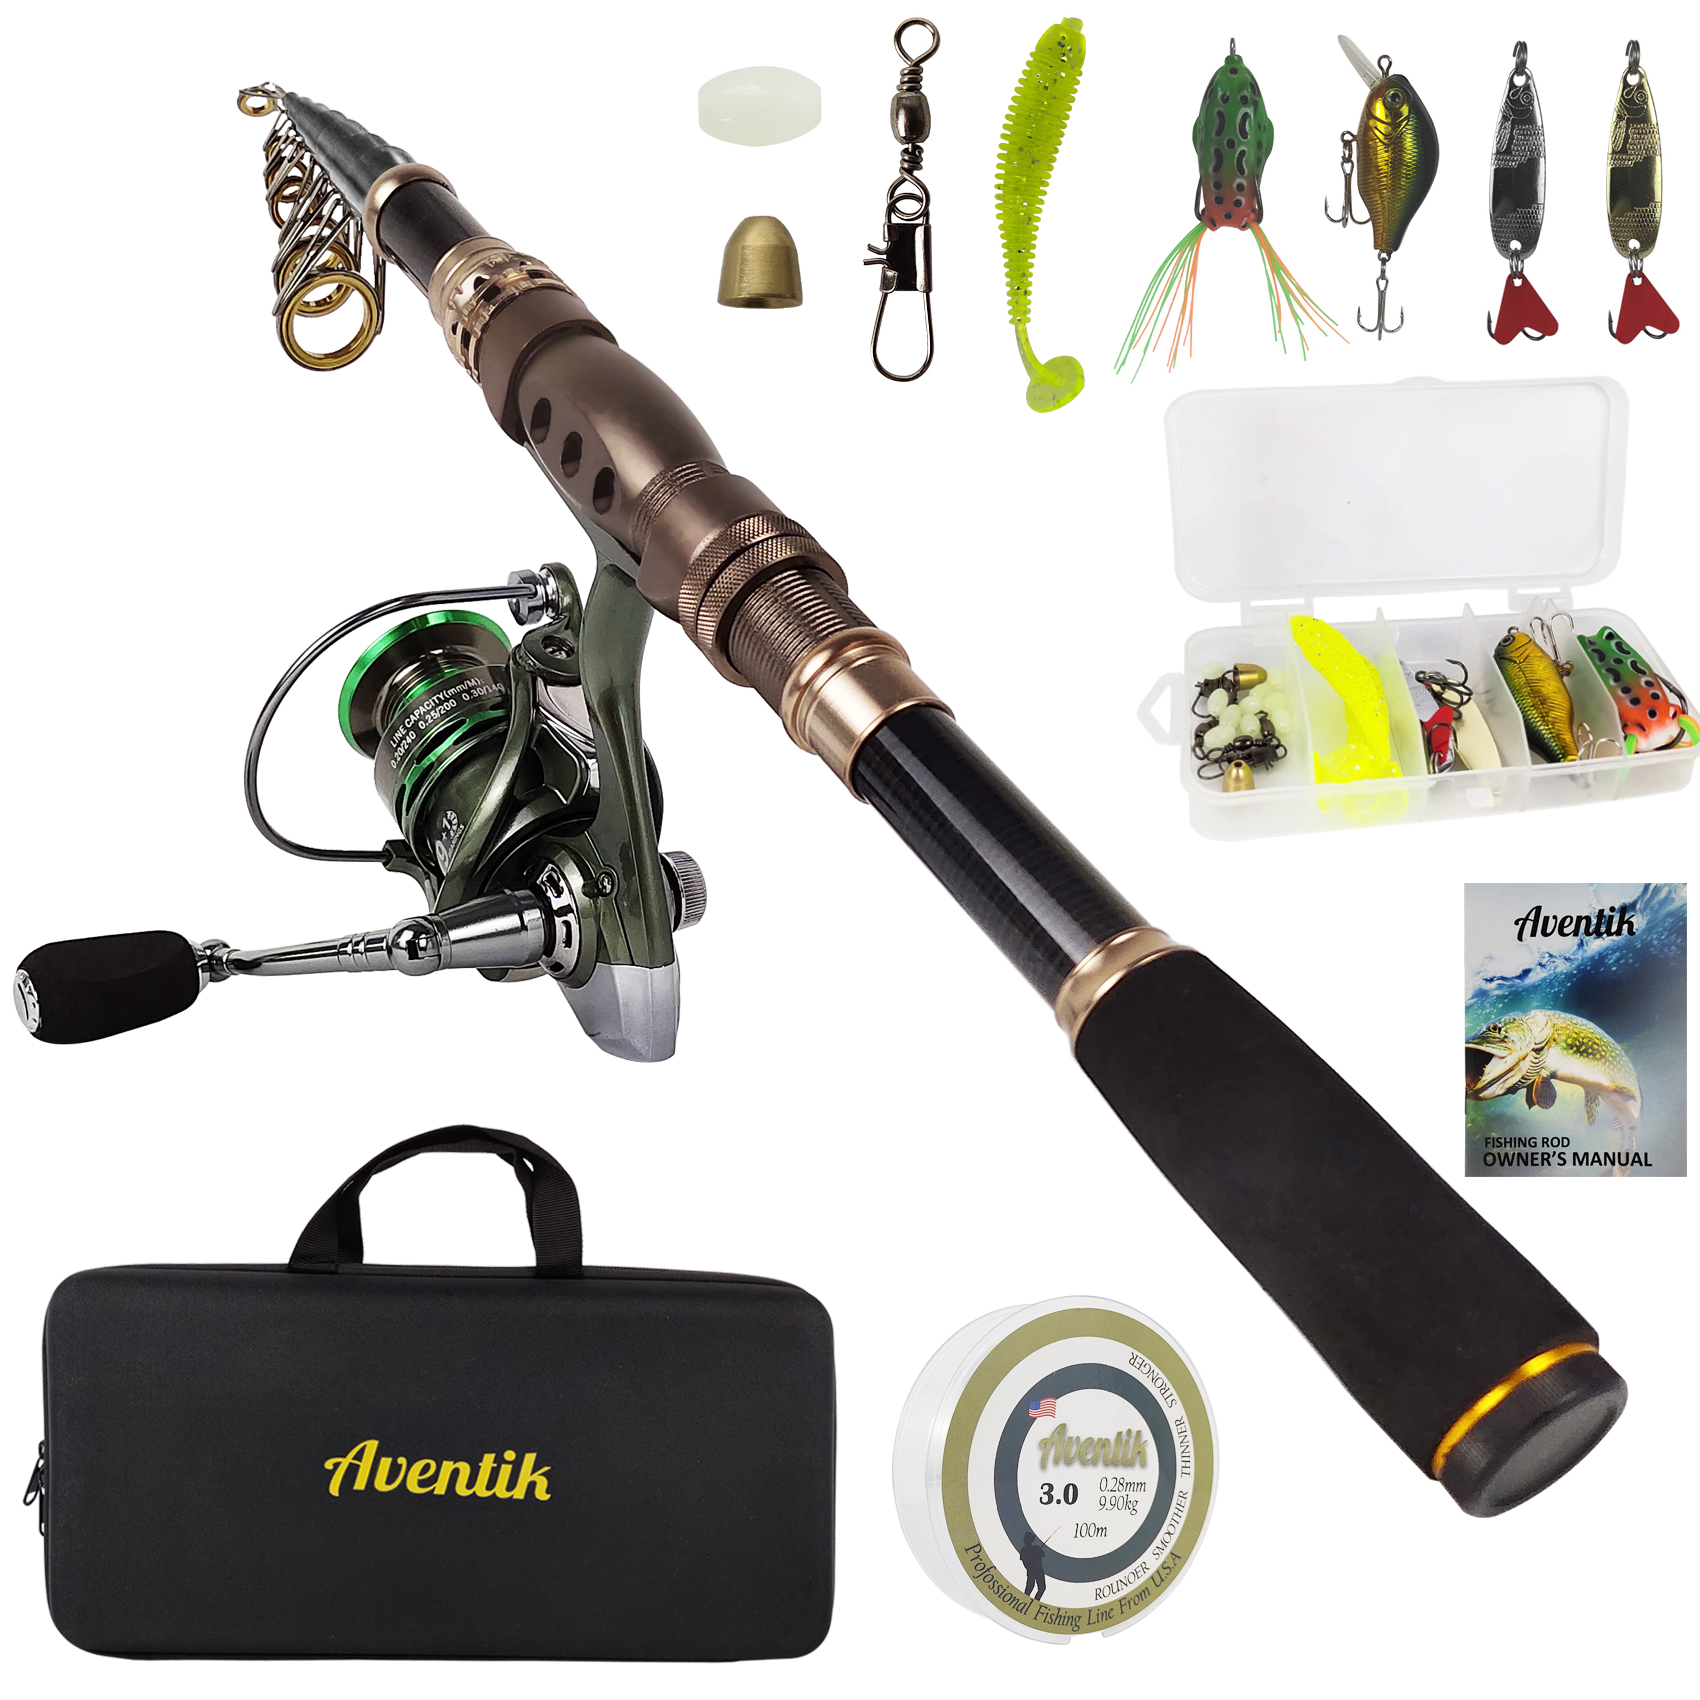 FishOaky Fishing Rod kit, Carbon Fiber Telescopic Fishing Pole and Reel  Combo with Line Lures Tackle Hooks Reel Carrier Bag for Adults Travel